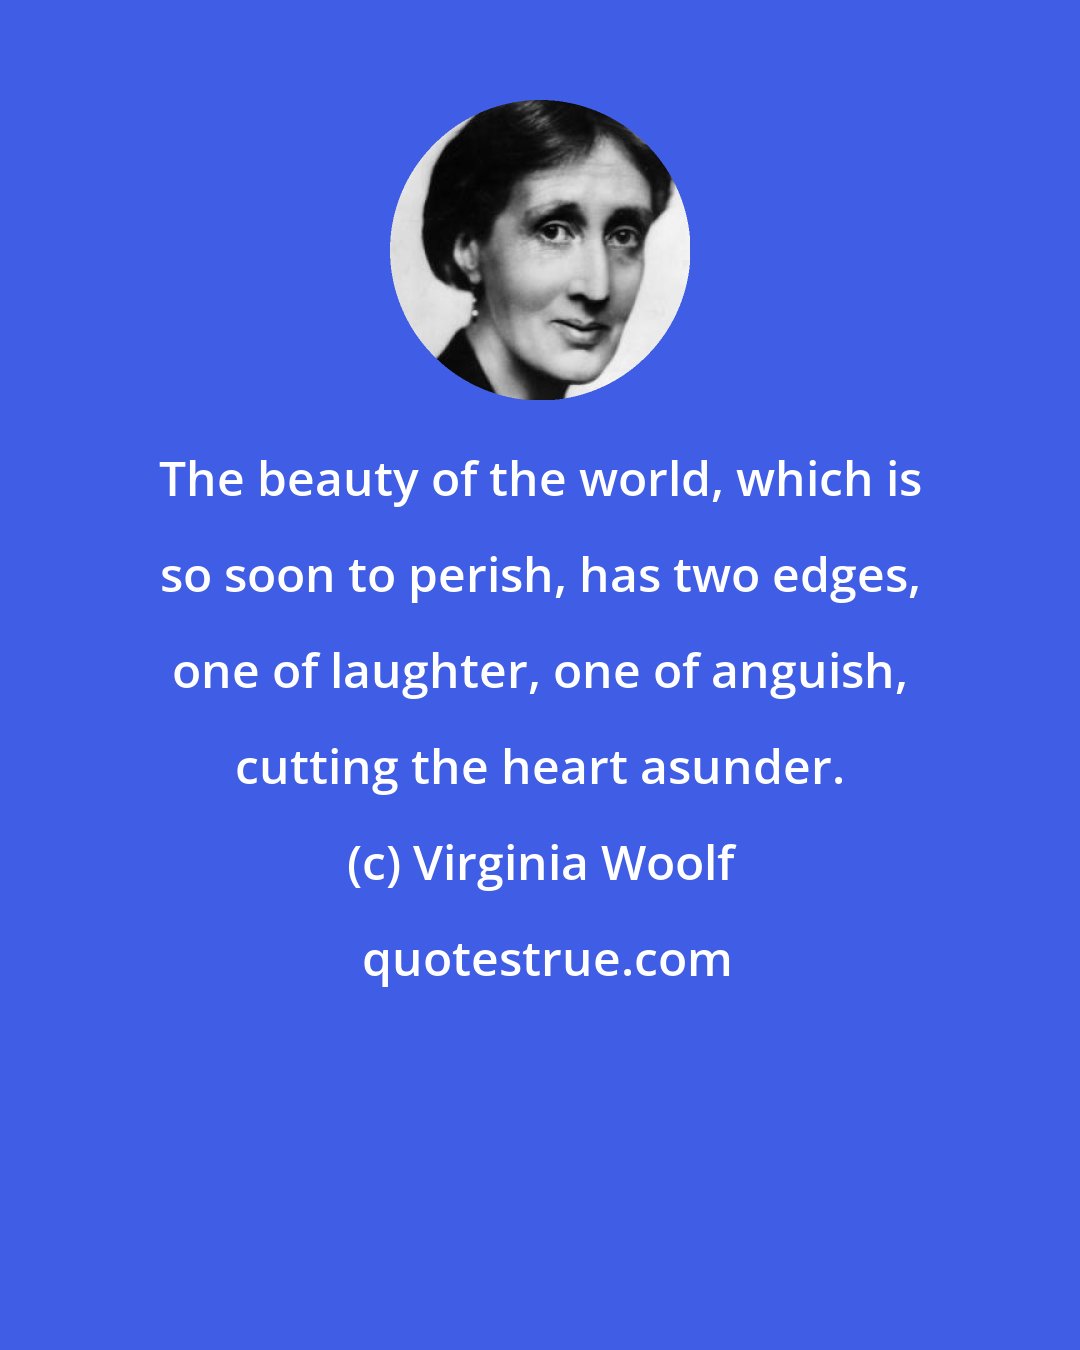 Virginia Woolf: The beauty of the world, which is so soon to perish, has two edges, one of laughter, one of anguish, cutting the heart asunder.